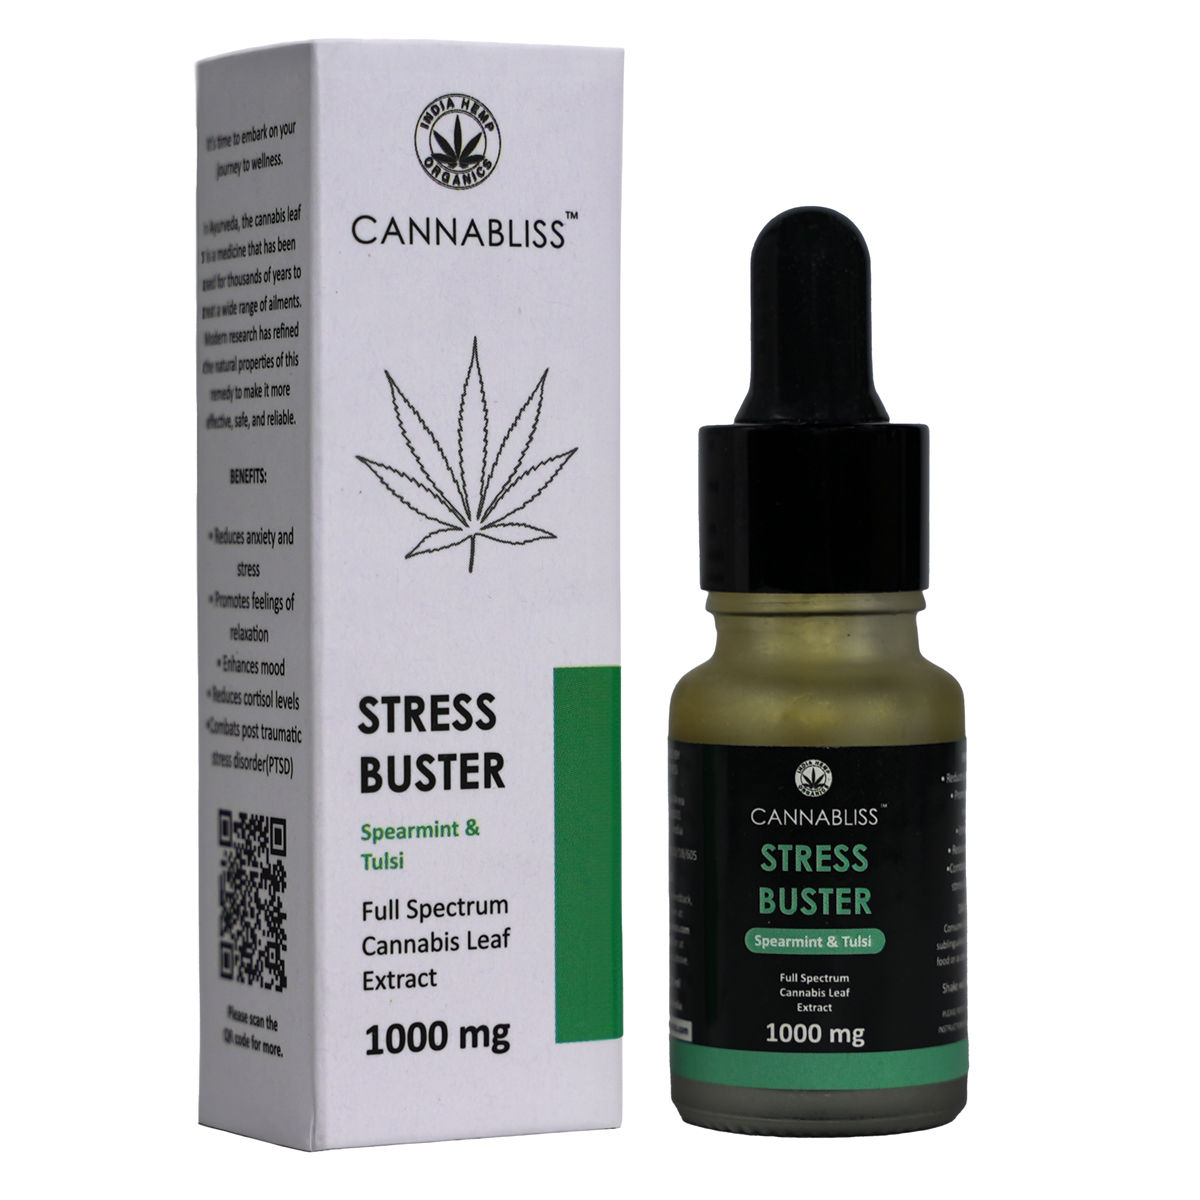 Buy Cannabliss Stress Buster 1000 mg Oil, 10 ml Online